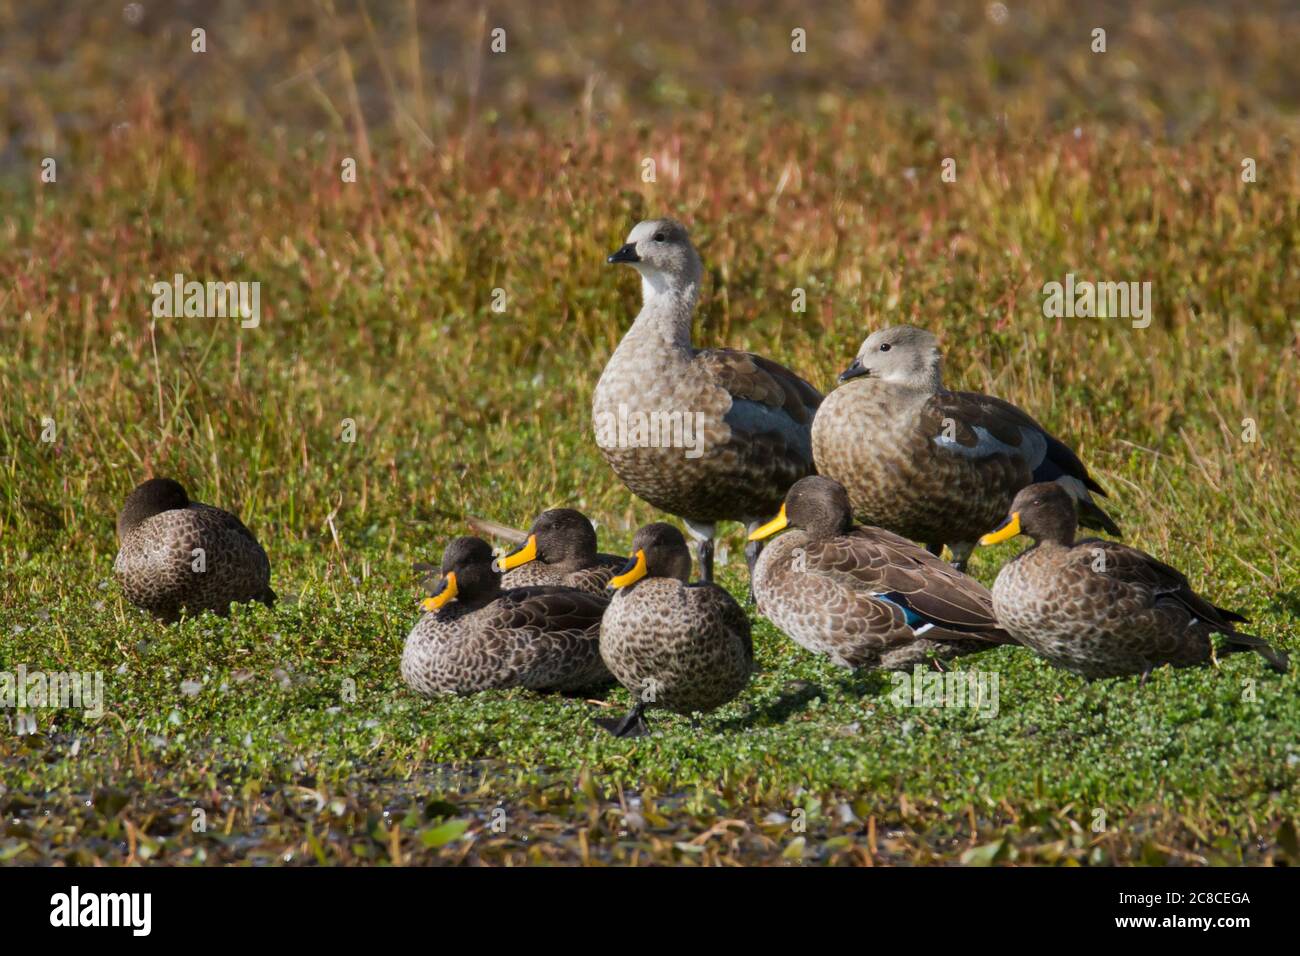 blue-winged goose (Cyanochen cyanoptera) and yellow-billed duck (Anas undulata) Photographed in Ethiopia in November Stock Photo